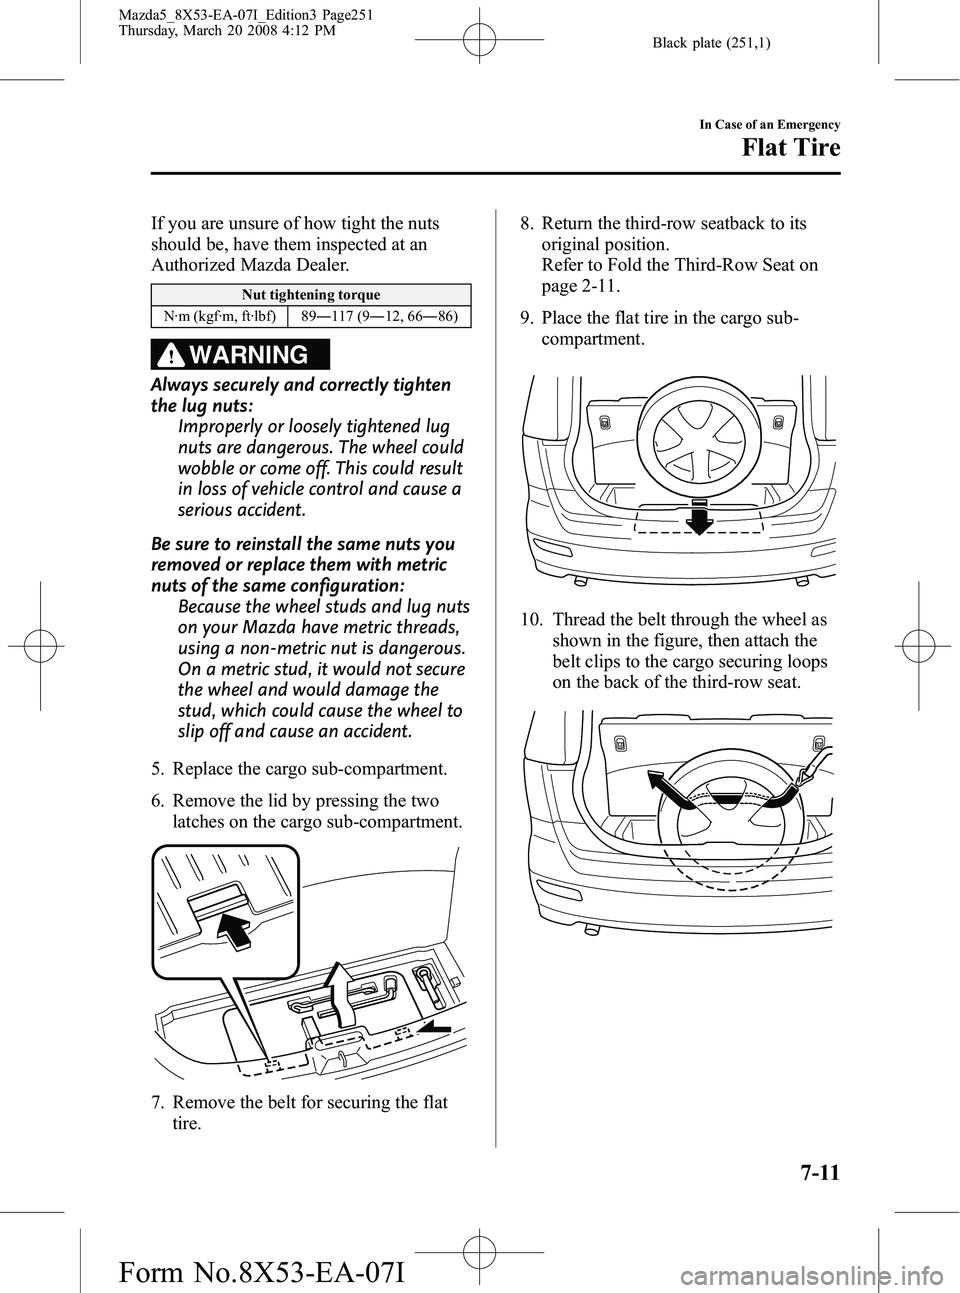 MAZDA MODEL 5 2008  Owners Manual Black plate (251,1)
If you are unsure of how tight the nuts
should be, have them inspected at an
Authorized Mazda Dealer.
Nut tightening torque
N·m (kgf·m, ft·lbf) 89 ―117 (9 ―12, 66 ―86)
WAR